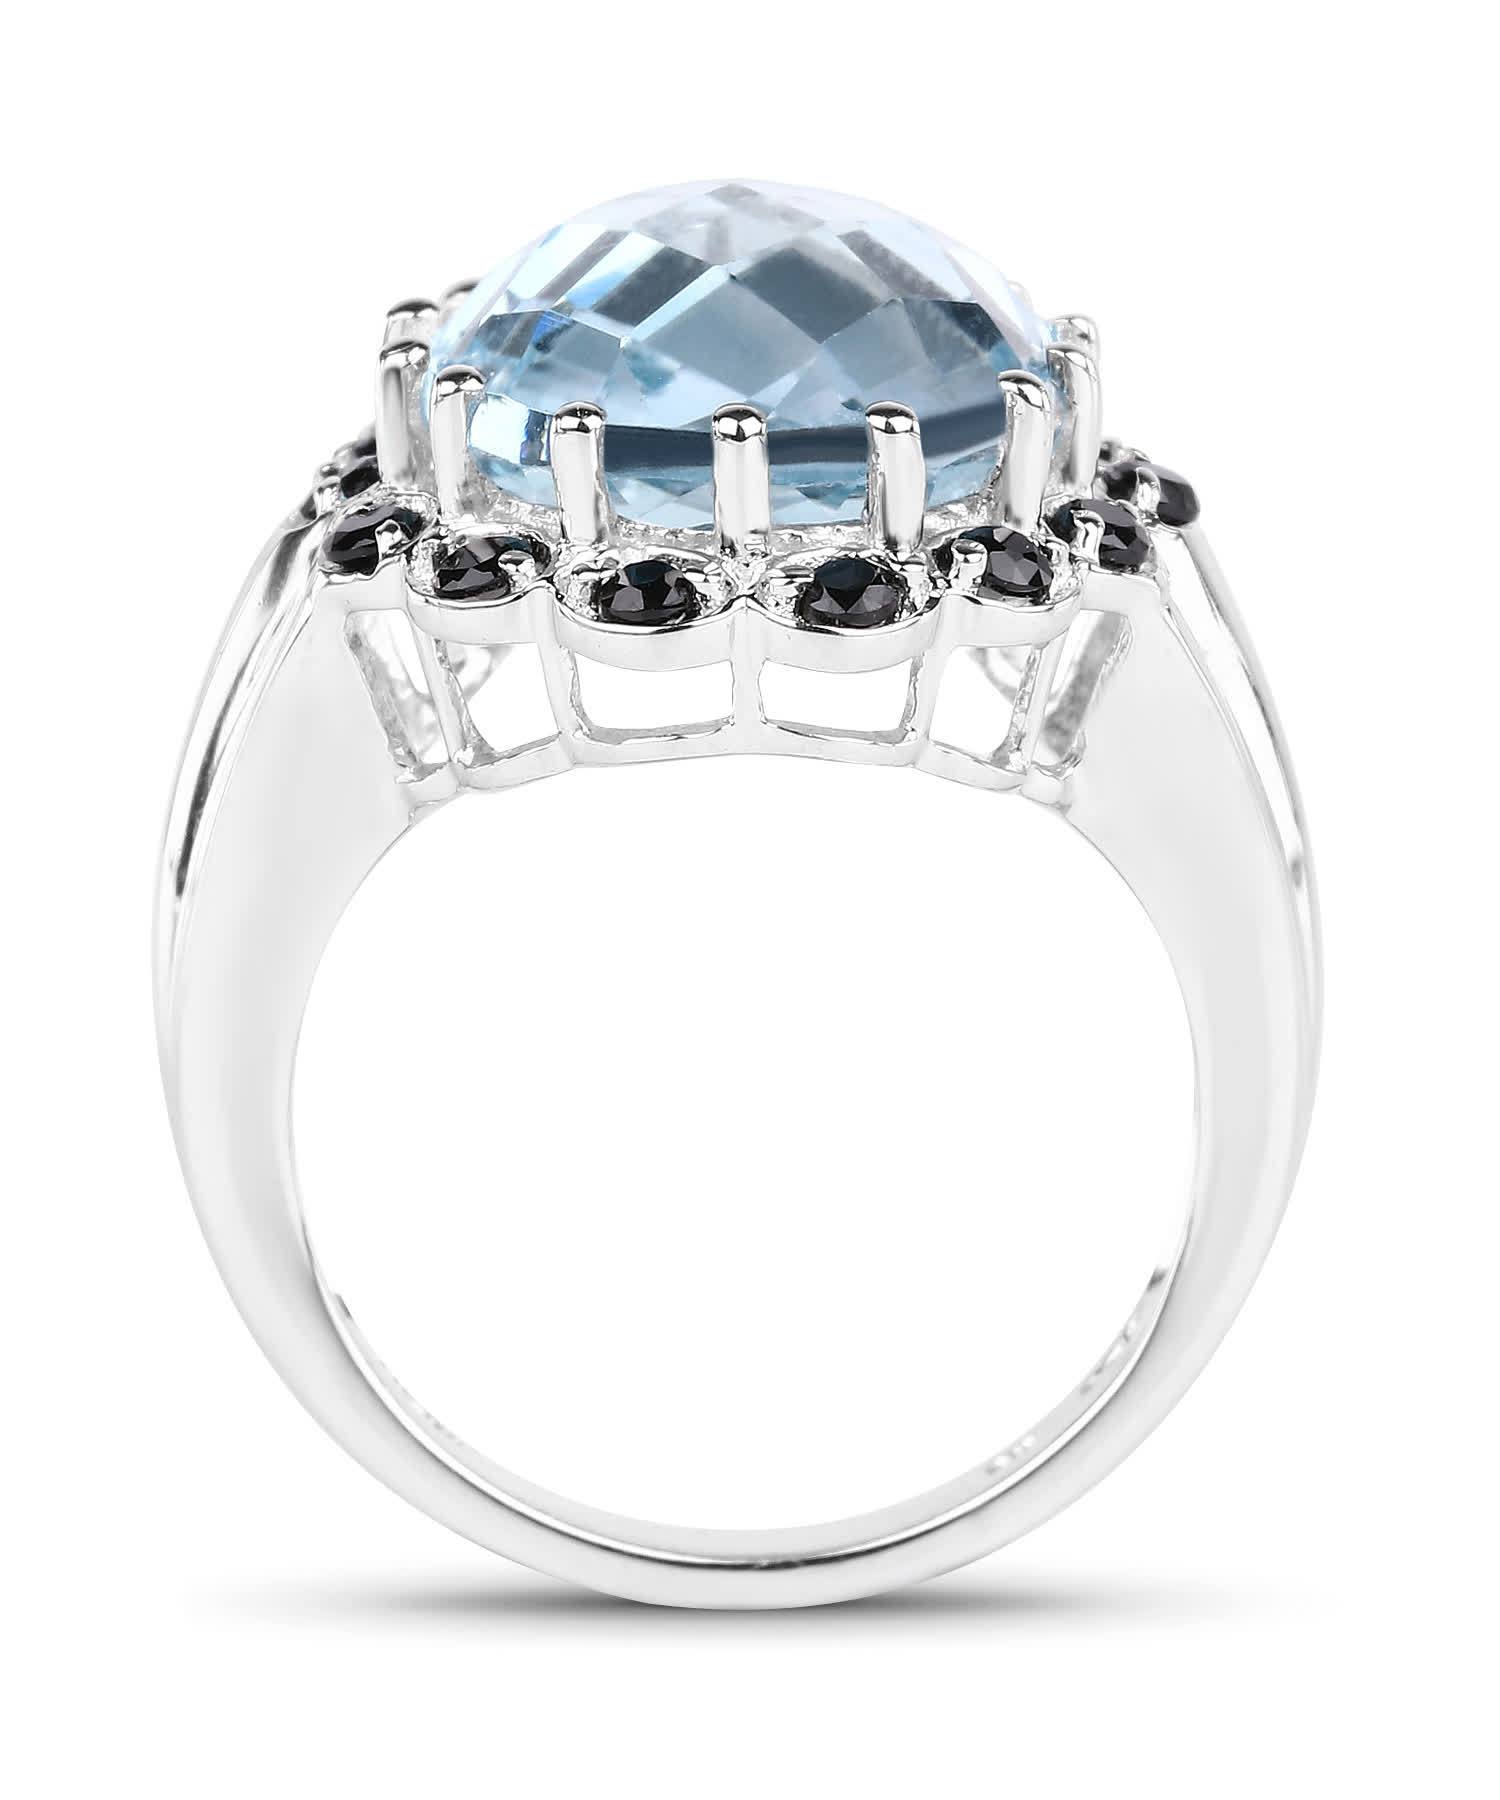 12.49ctw Natural Swiss Blue Topaz and Black Spinel Rhodium Plated 925 Sterling Silver Halo Cocktail Ring View 2